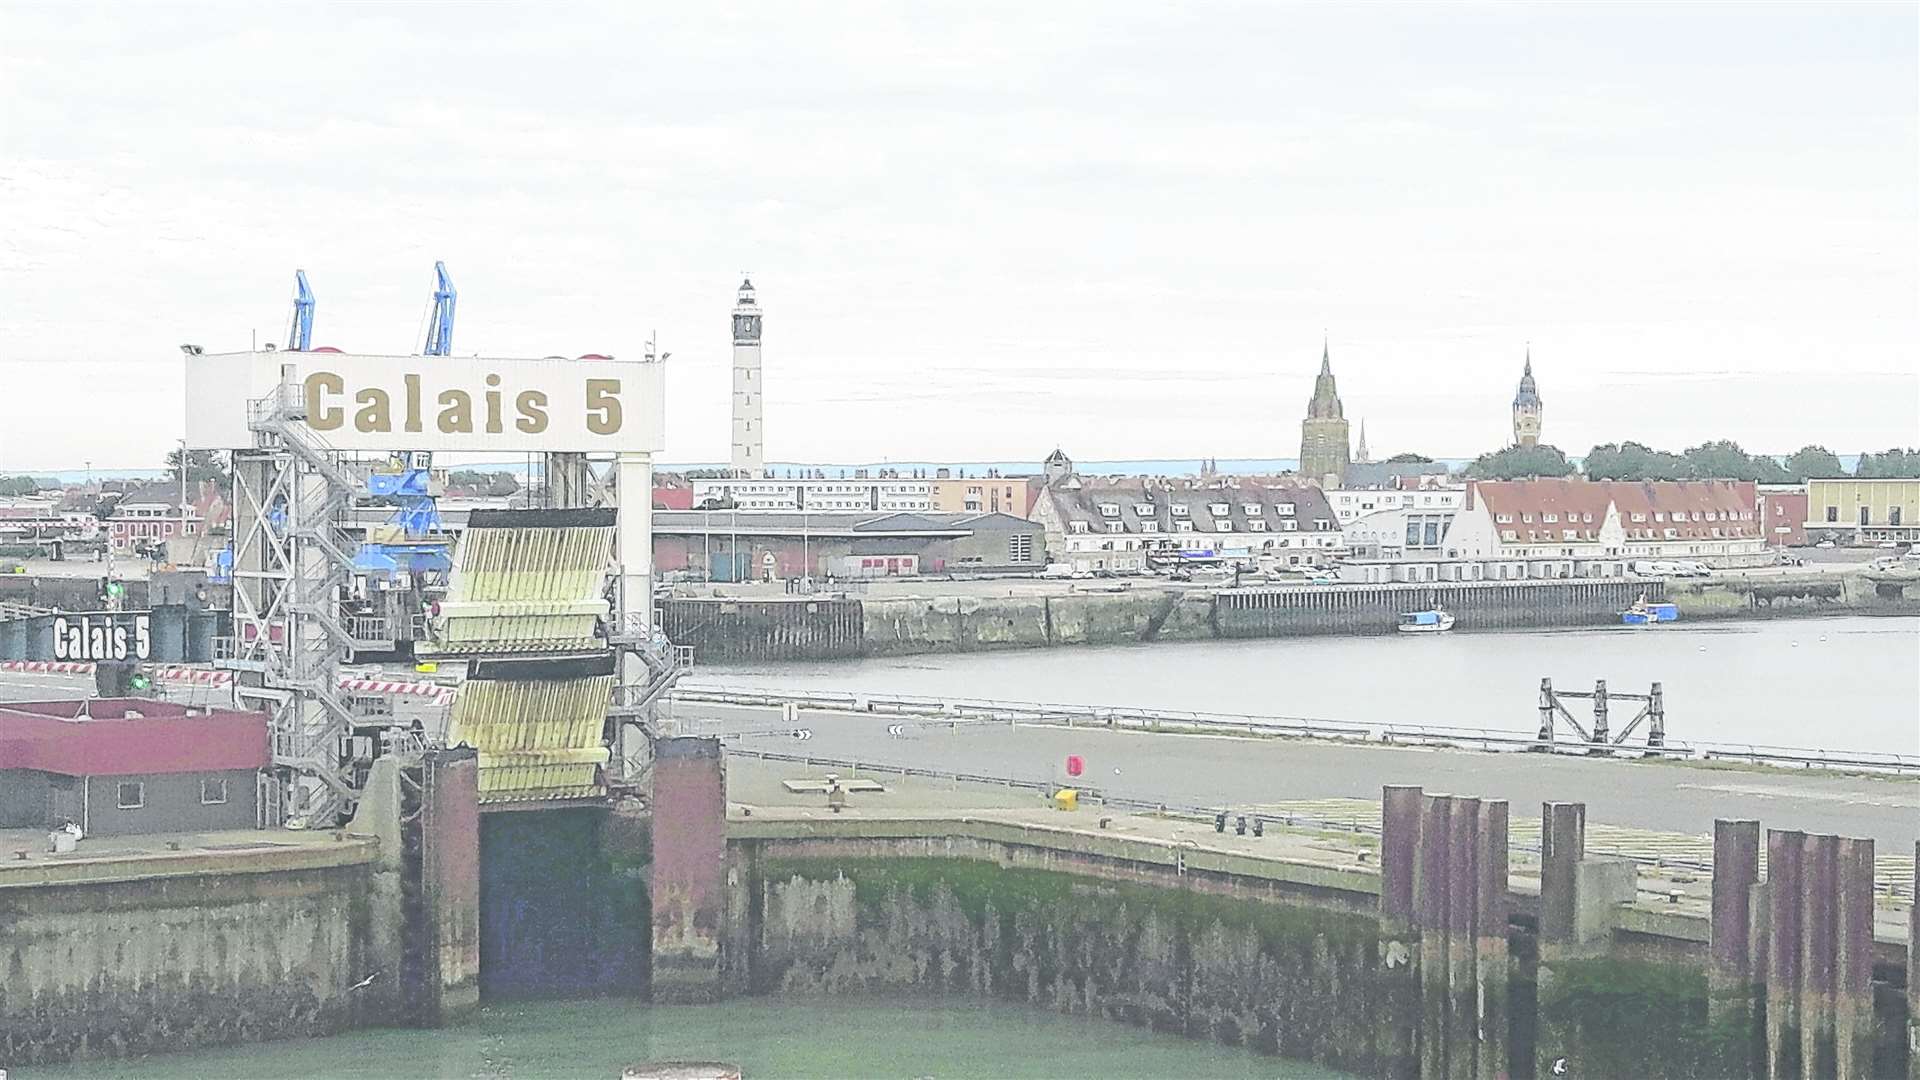 Lorries are being held up reaching the Port of Calais. Library image